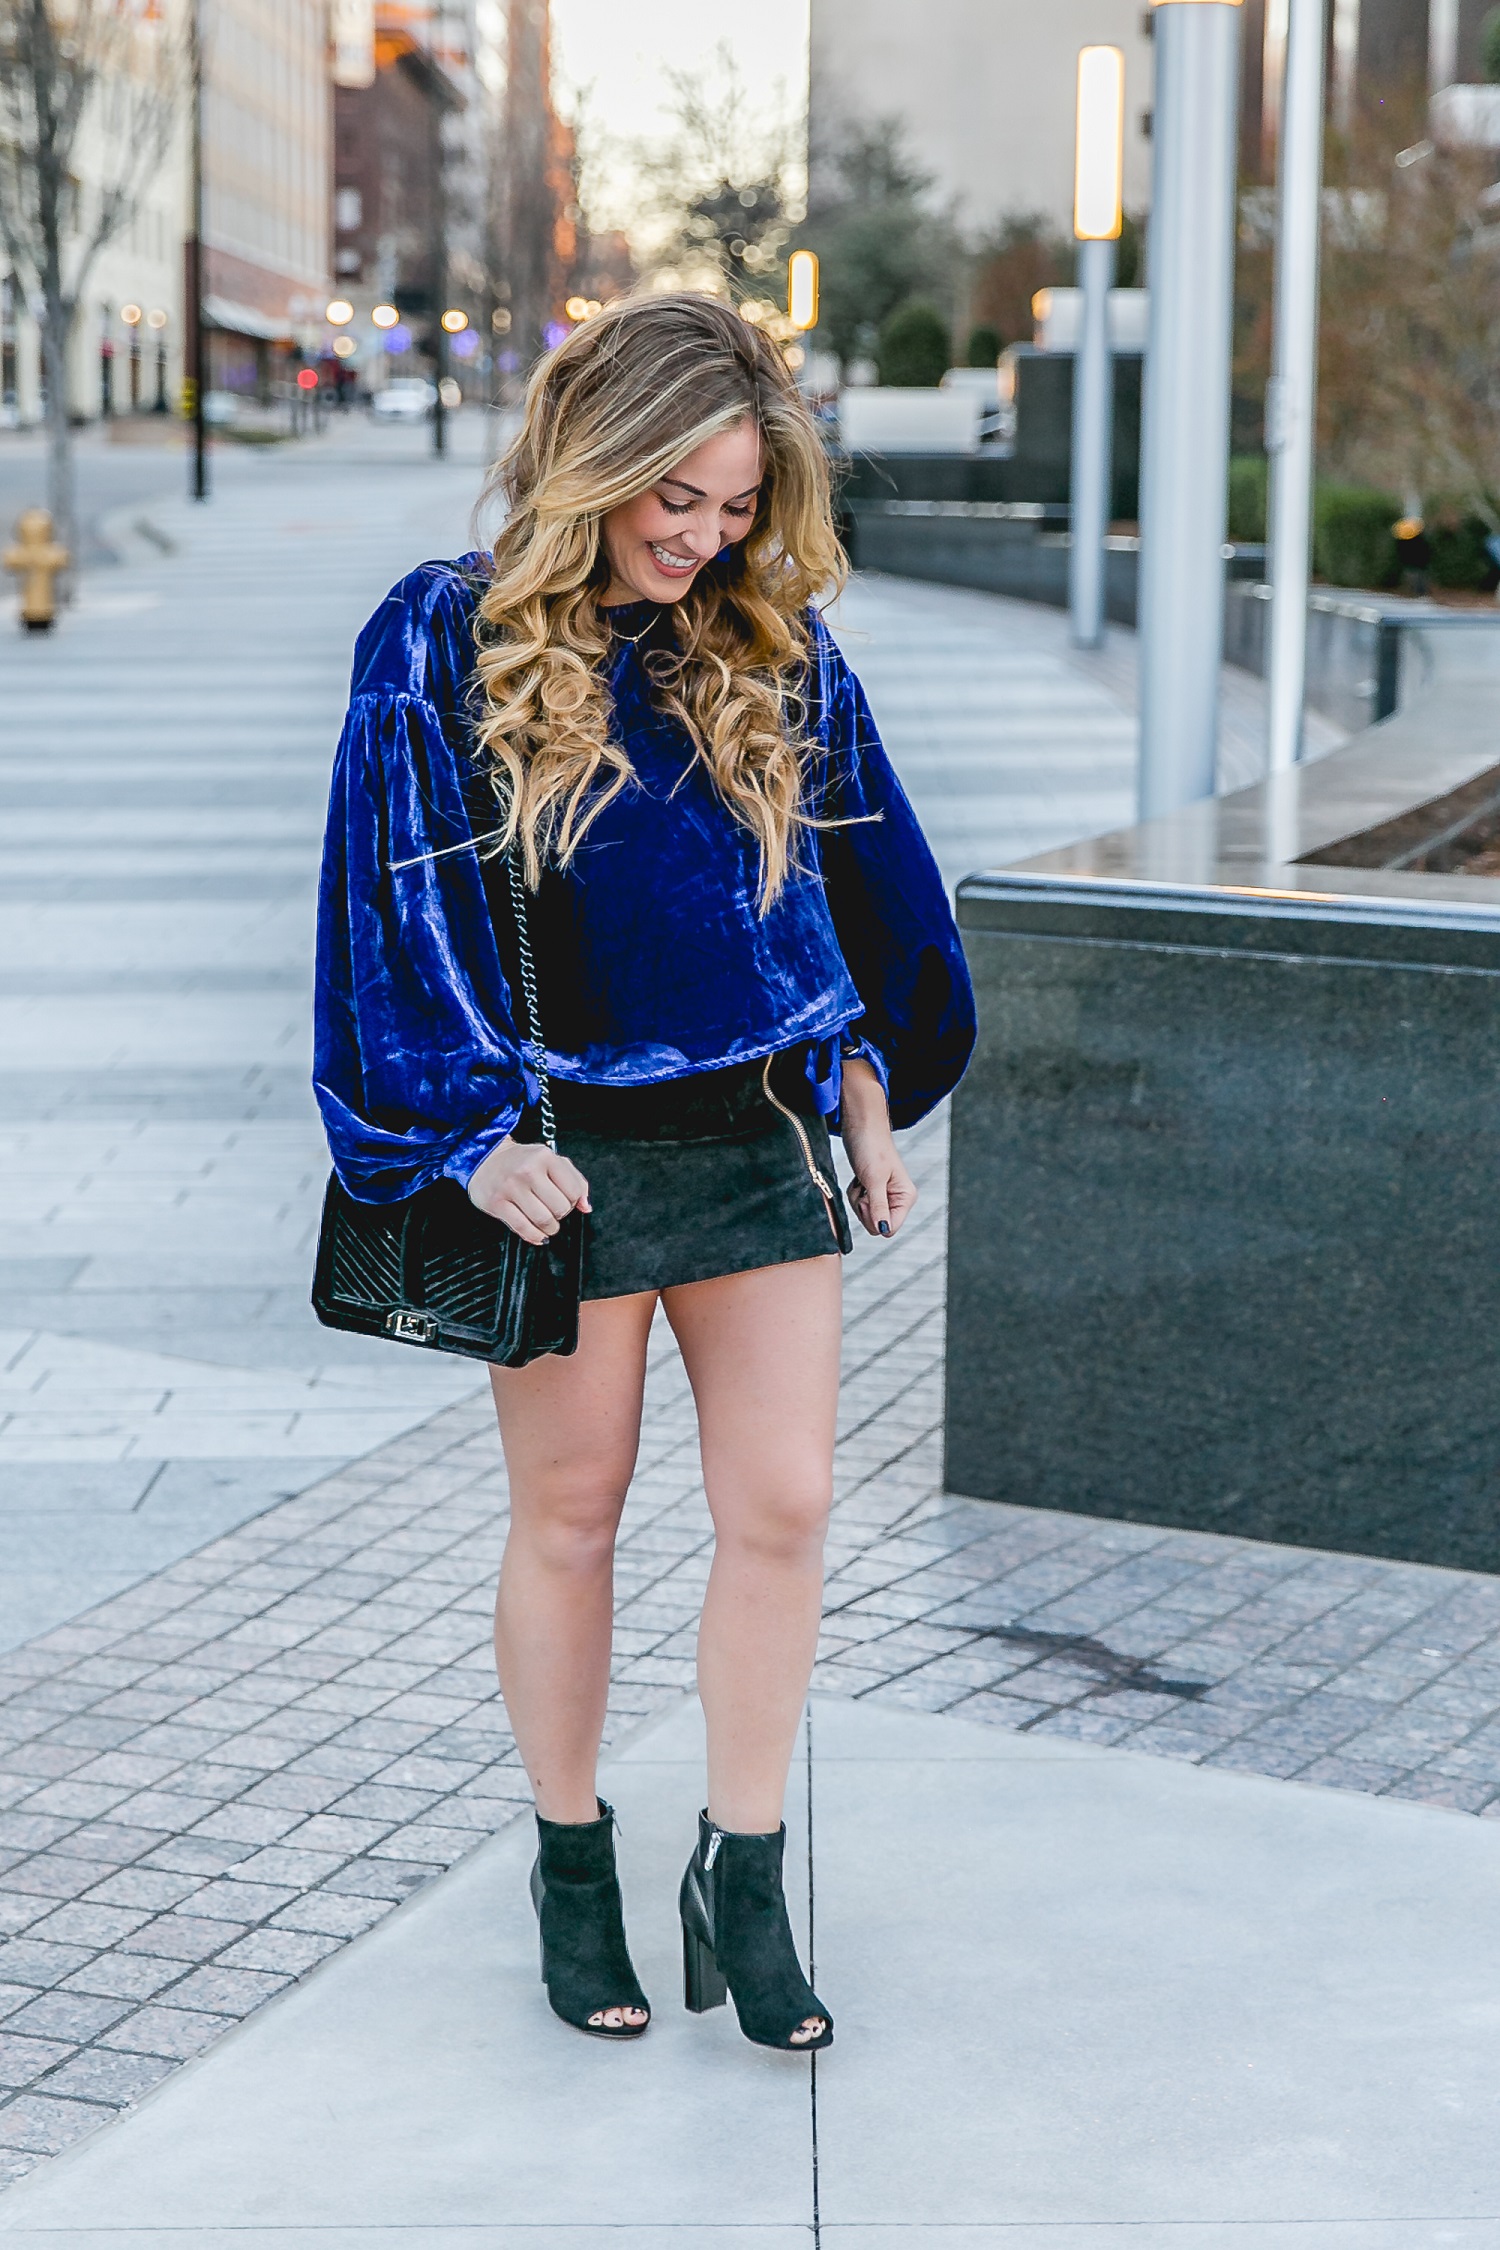 Winter Booties by popular East Memphis fashion blogger Walking in Memphis in High Heels